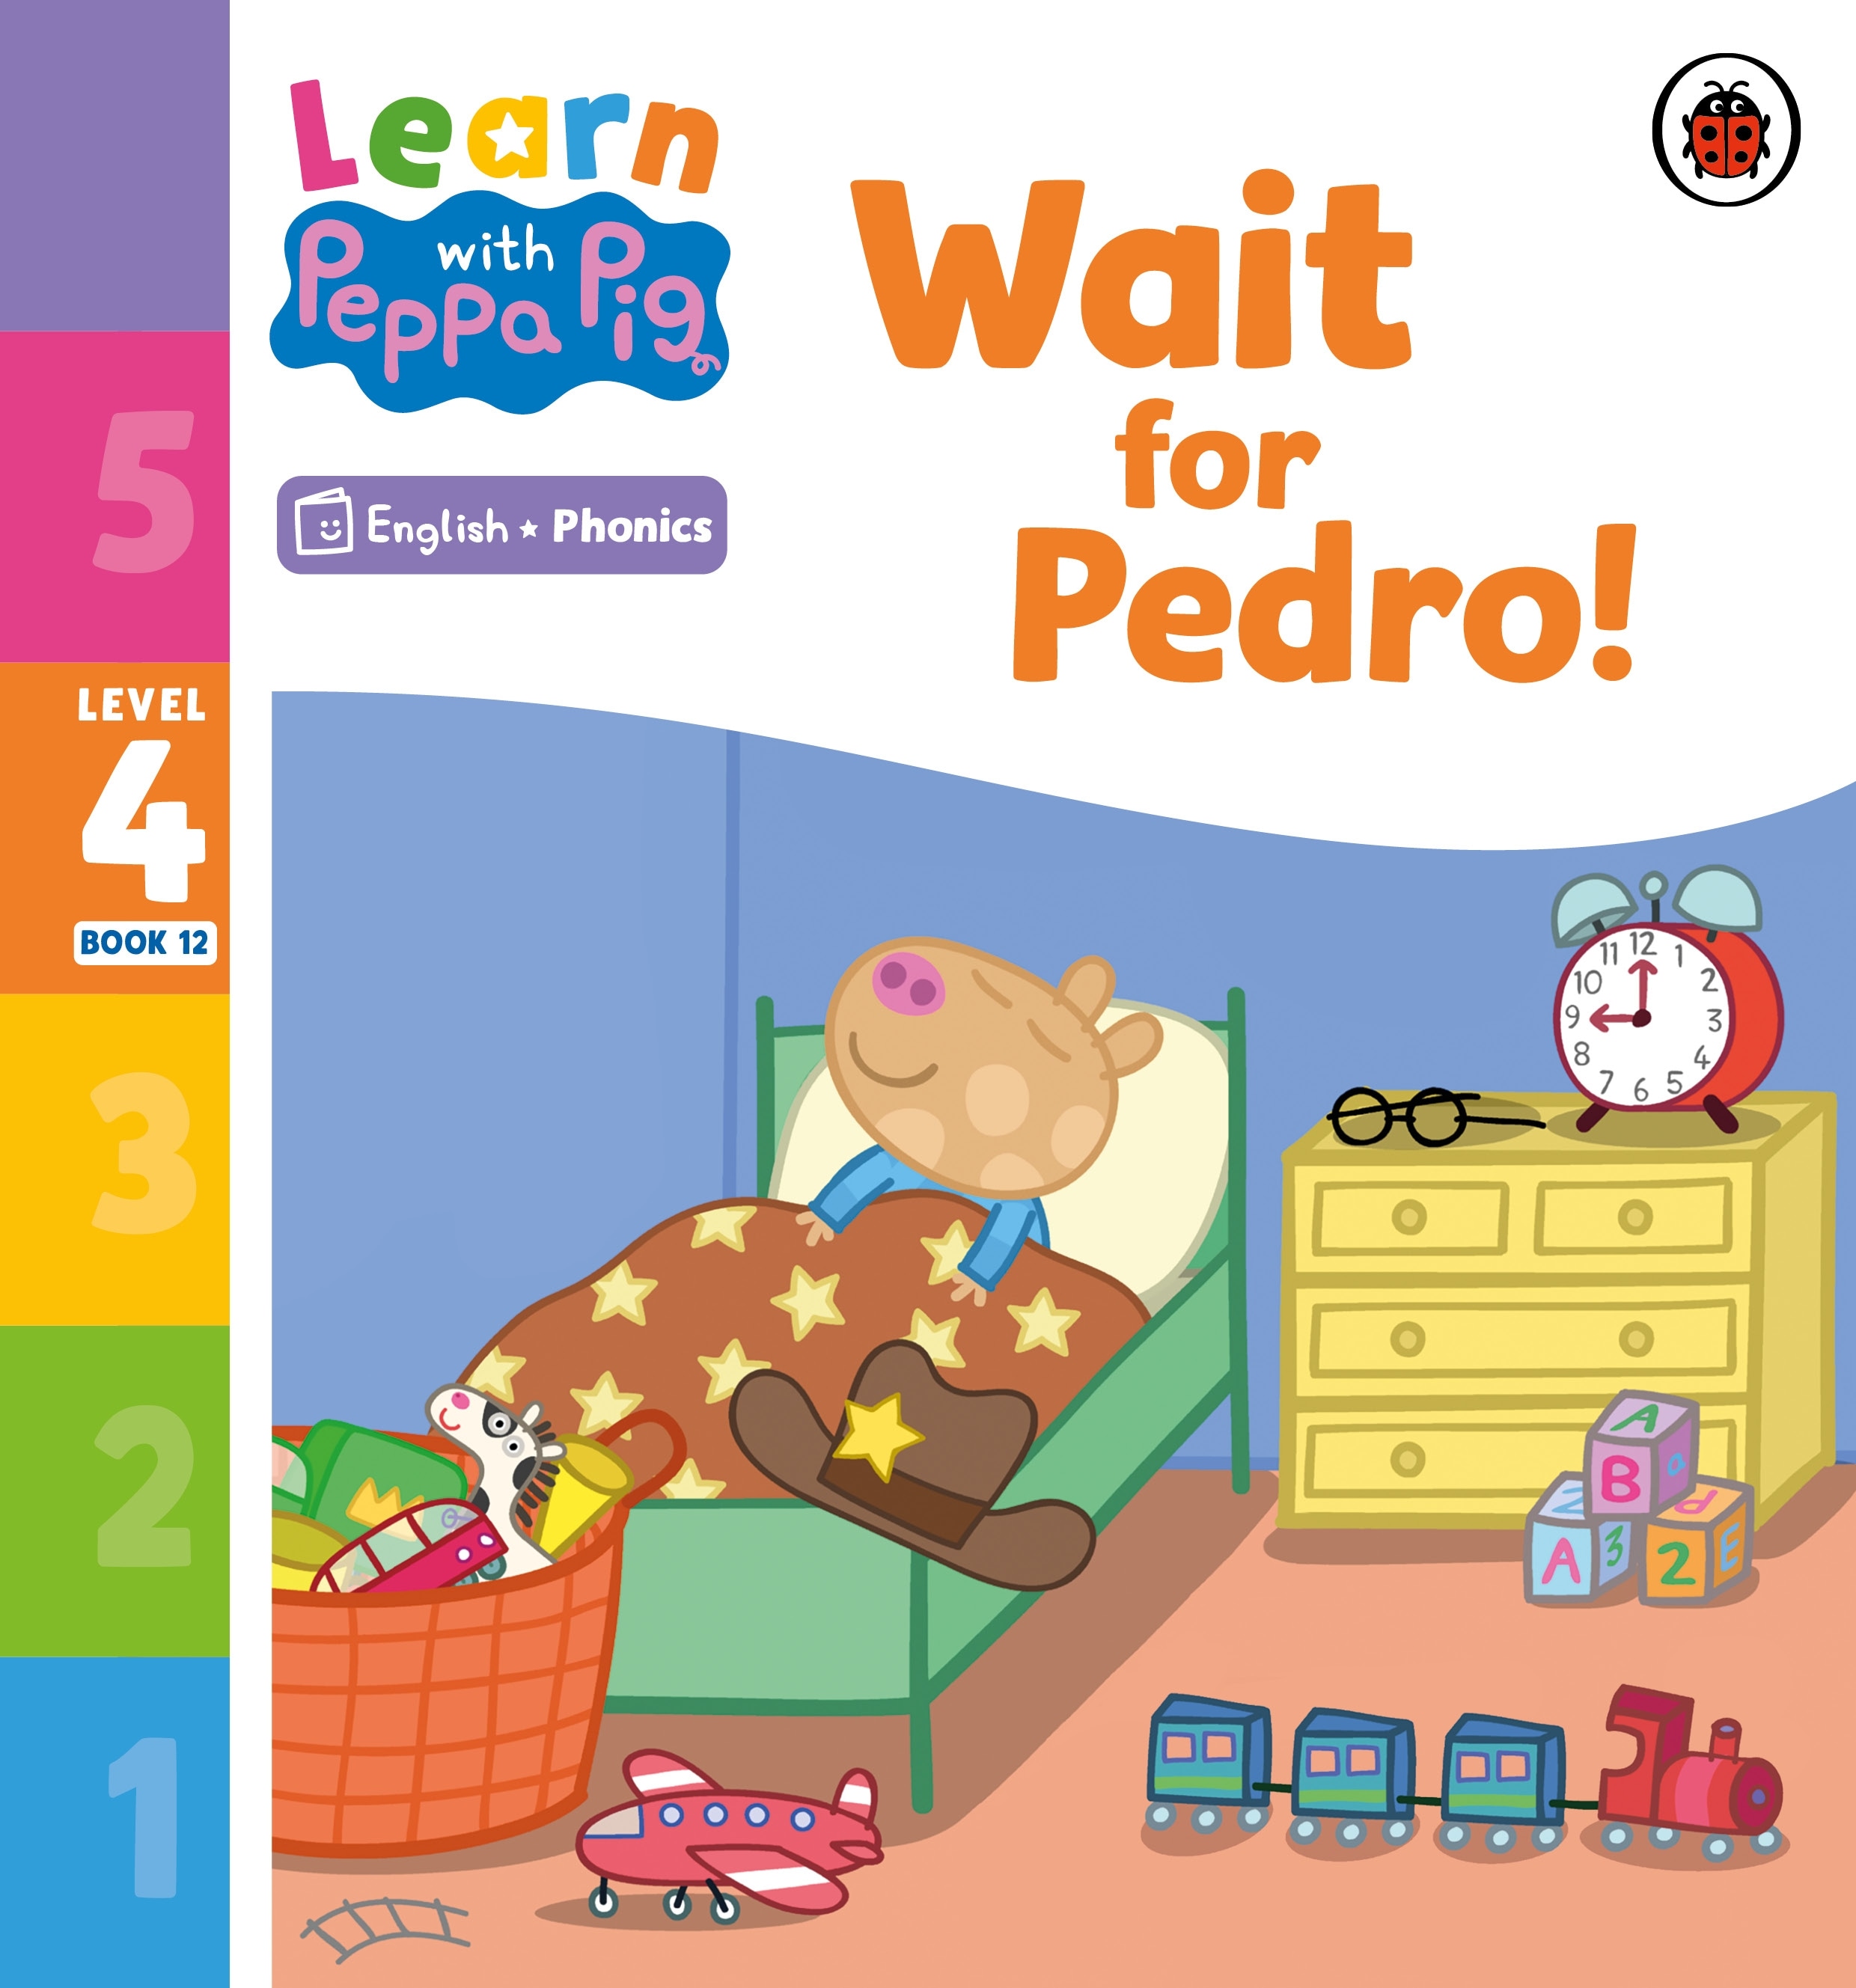 Learn with Peppa Phonics Level 4 Book 12 — Wait for Pedro! (Phonics Reader)